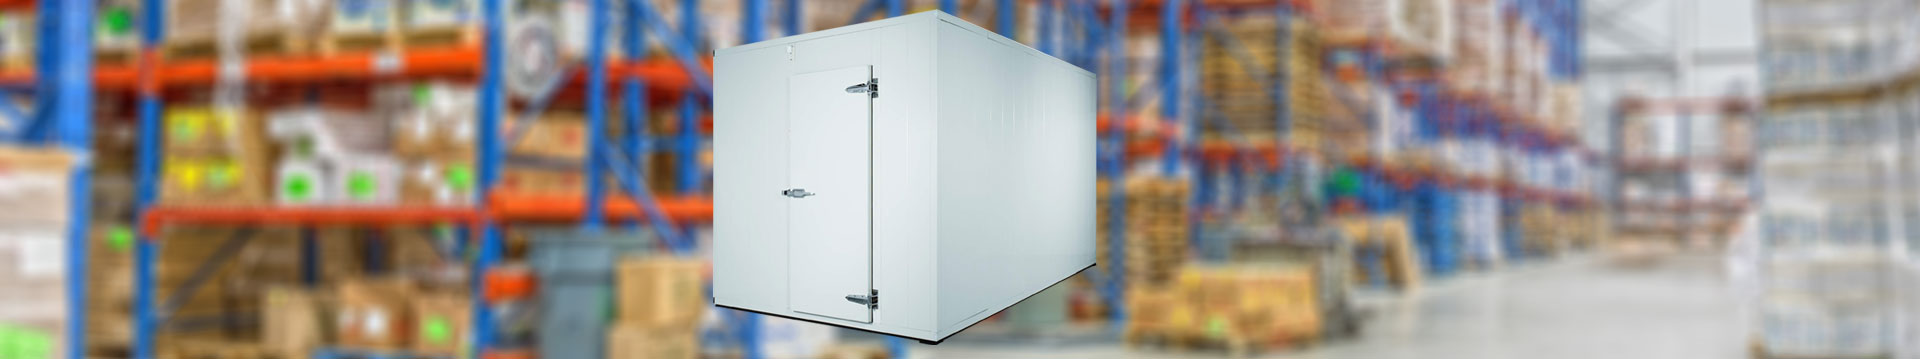 Cold Room Parts | Refrigeration Unit For Cold Room